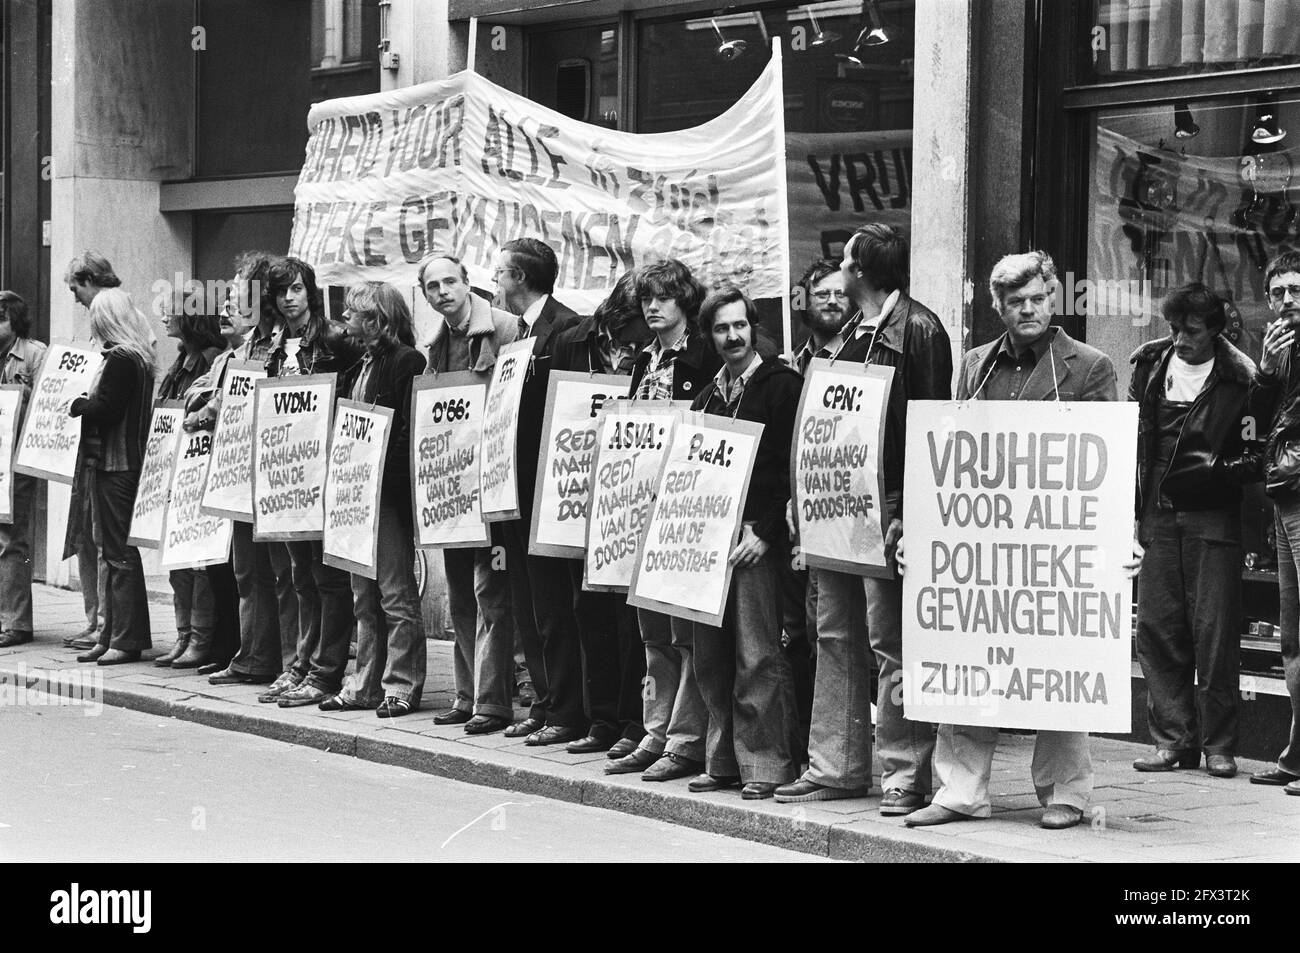 Demonstration in front of South African aircraft company. Luydiens against death penalty Solomon Mahlanger, September 16, 1978, DEATH STRAINS, demonstrations, The Netherlands, 20th century press agency photo, news to remember, documentary, historic photography 1945-1990, visual stories, human history of the Twentieth Century, capturing moments in time Stock Photo